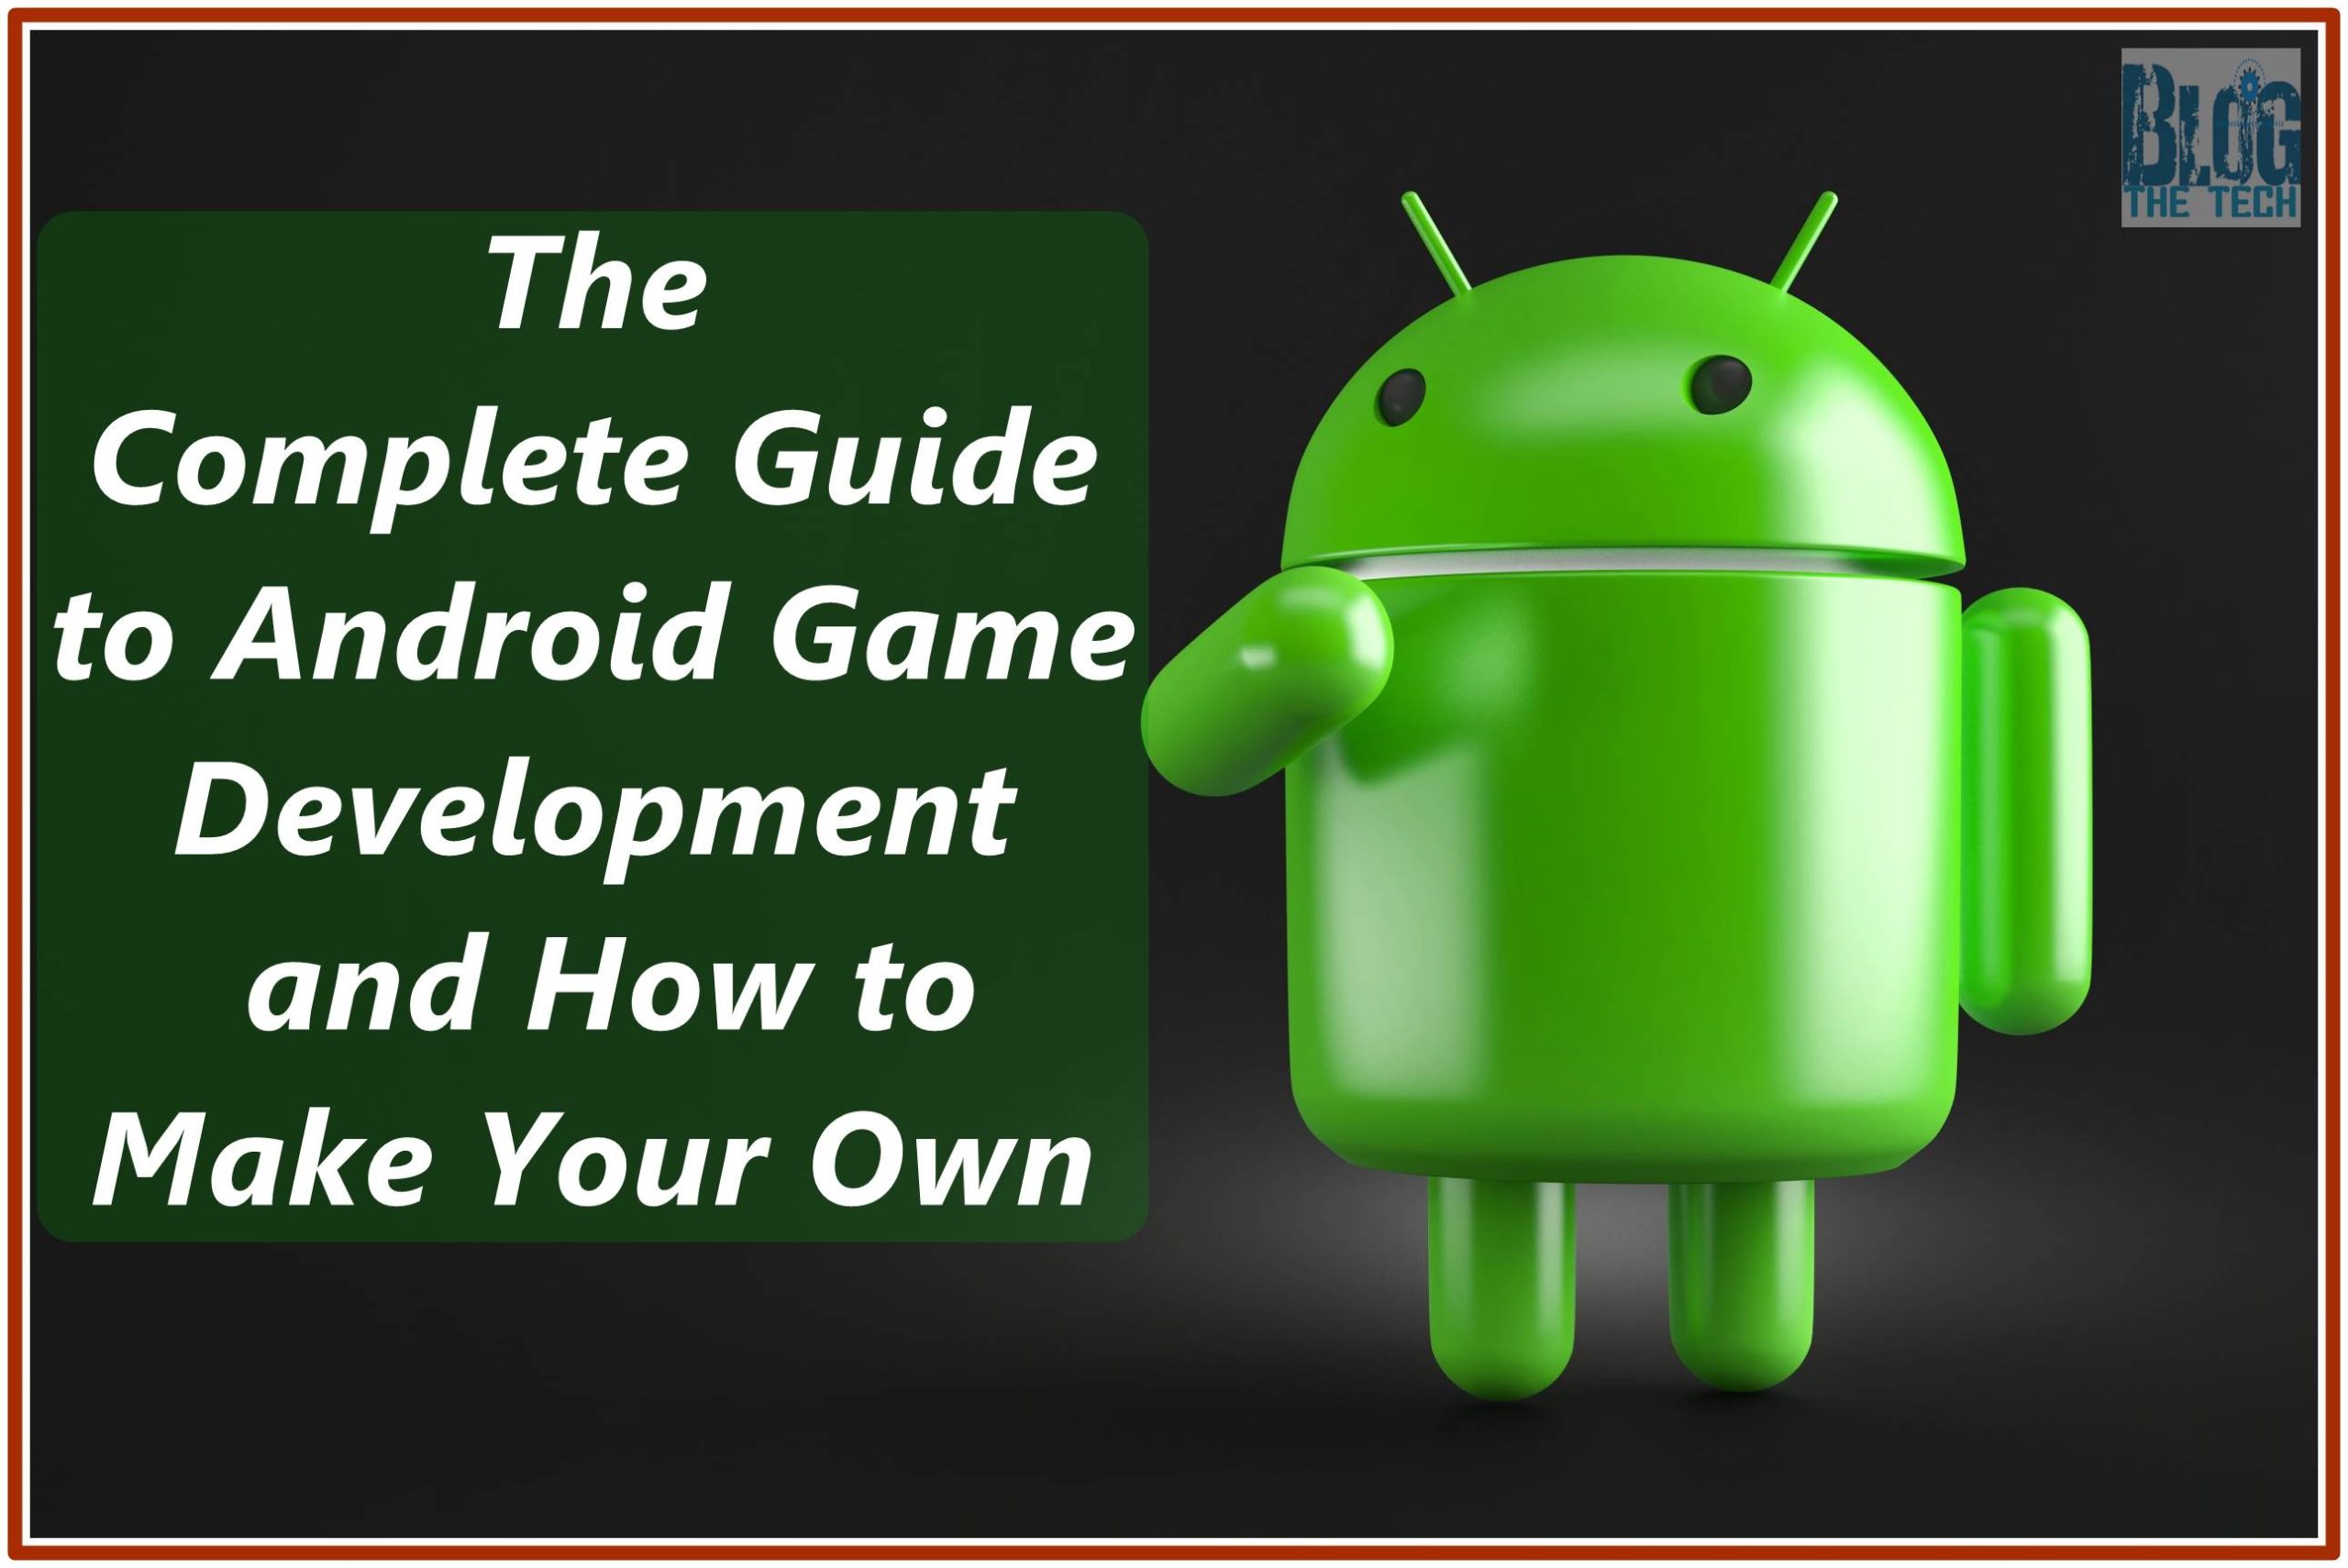 The Complete Guide to Android Game Development and How to Make Your Own